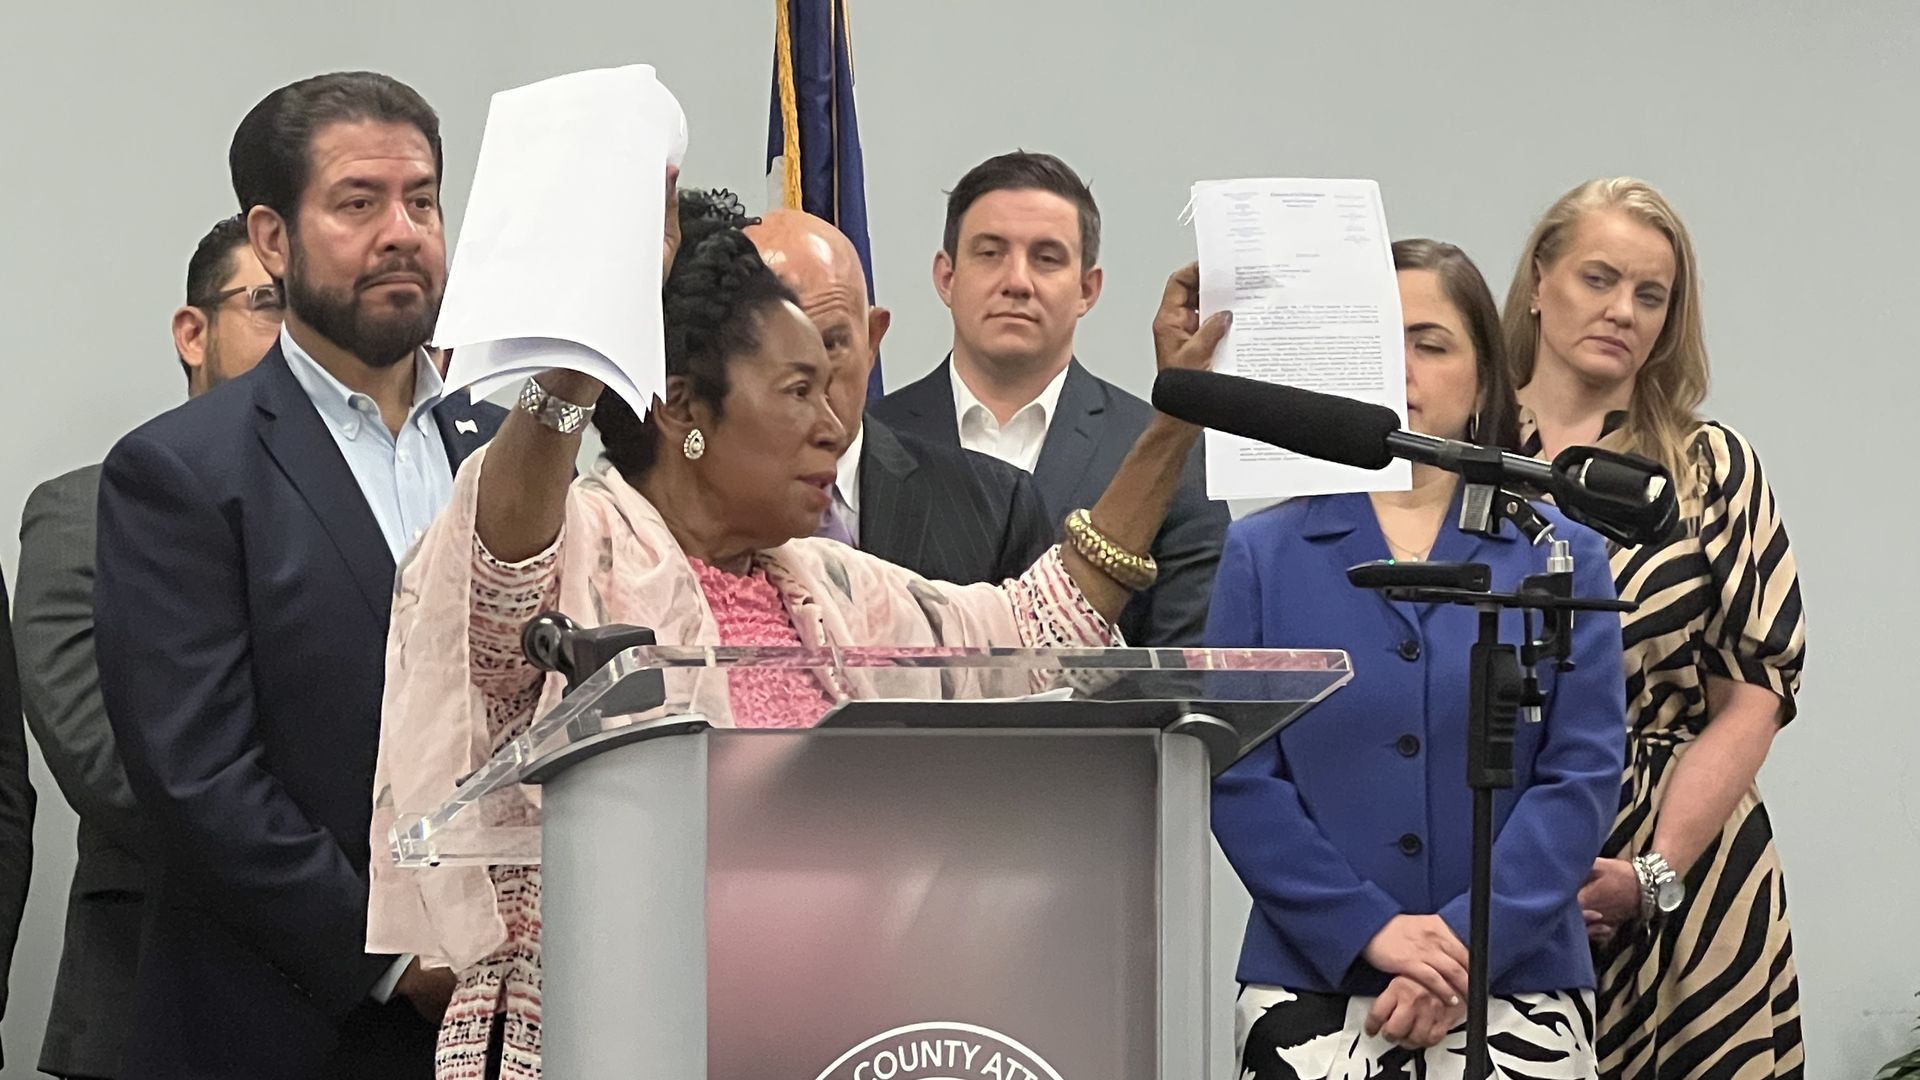 Democrat Congresswoman Sheila Jackson Lee holds up papers during a press conference announcing an EPA investigation.